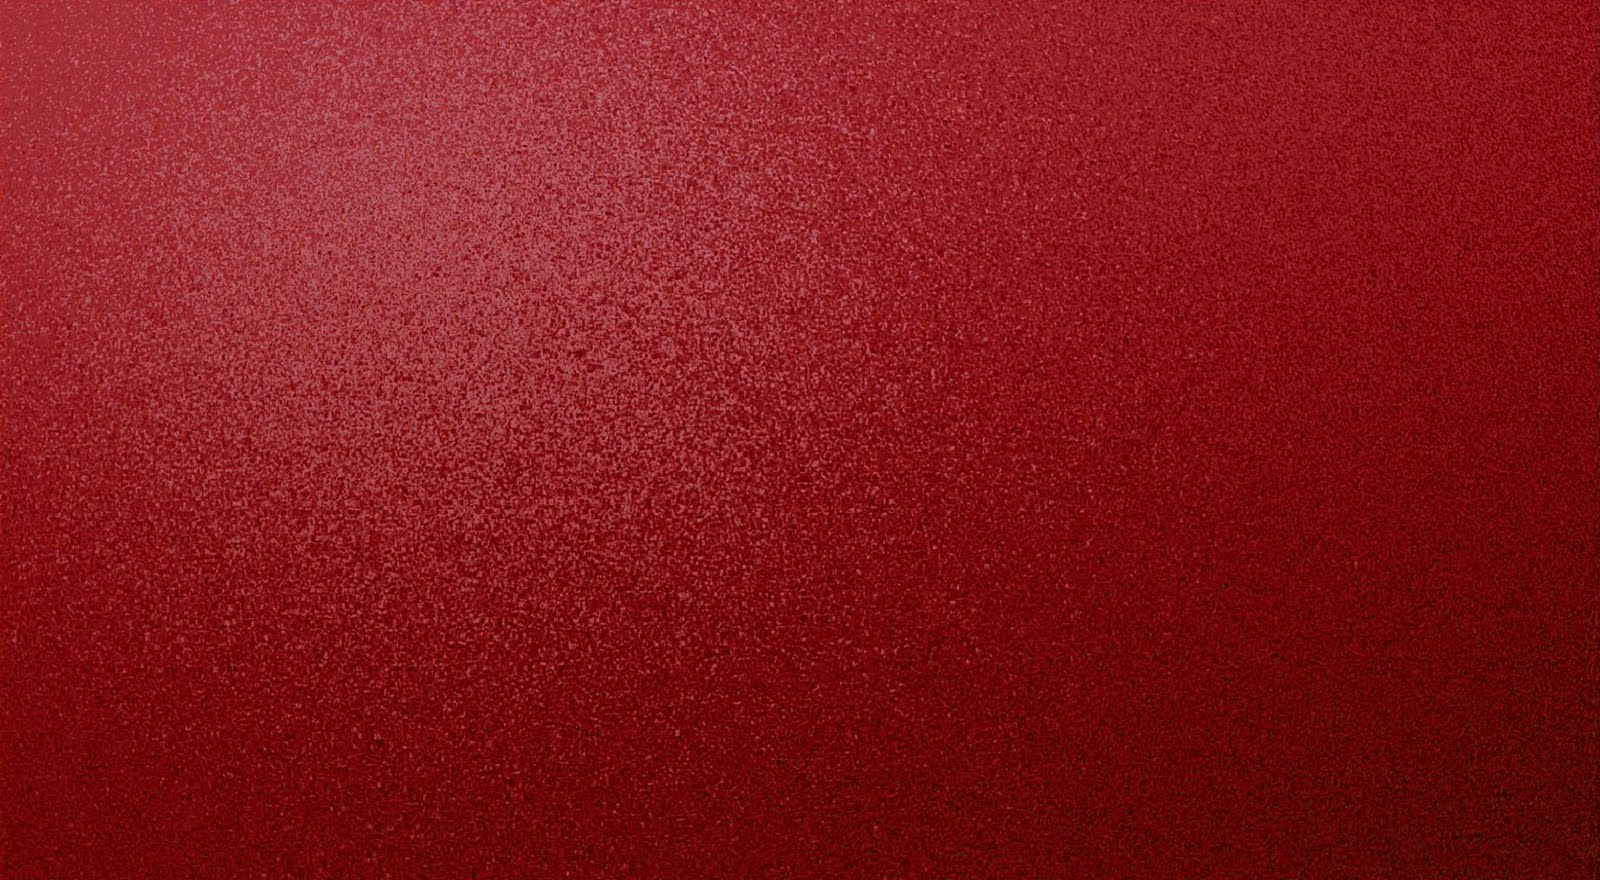 10929529 Red Texture Background Images Stock Photos  Vectors   Shutterstock